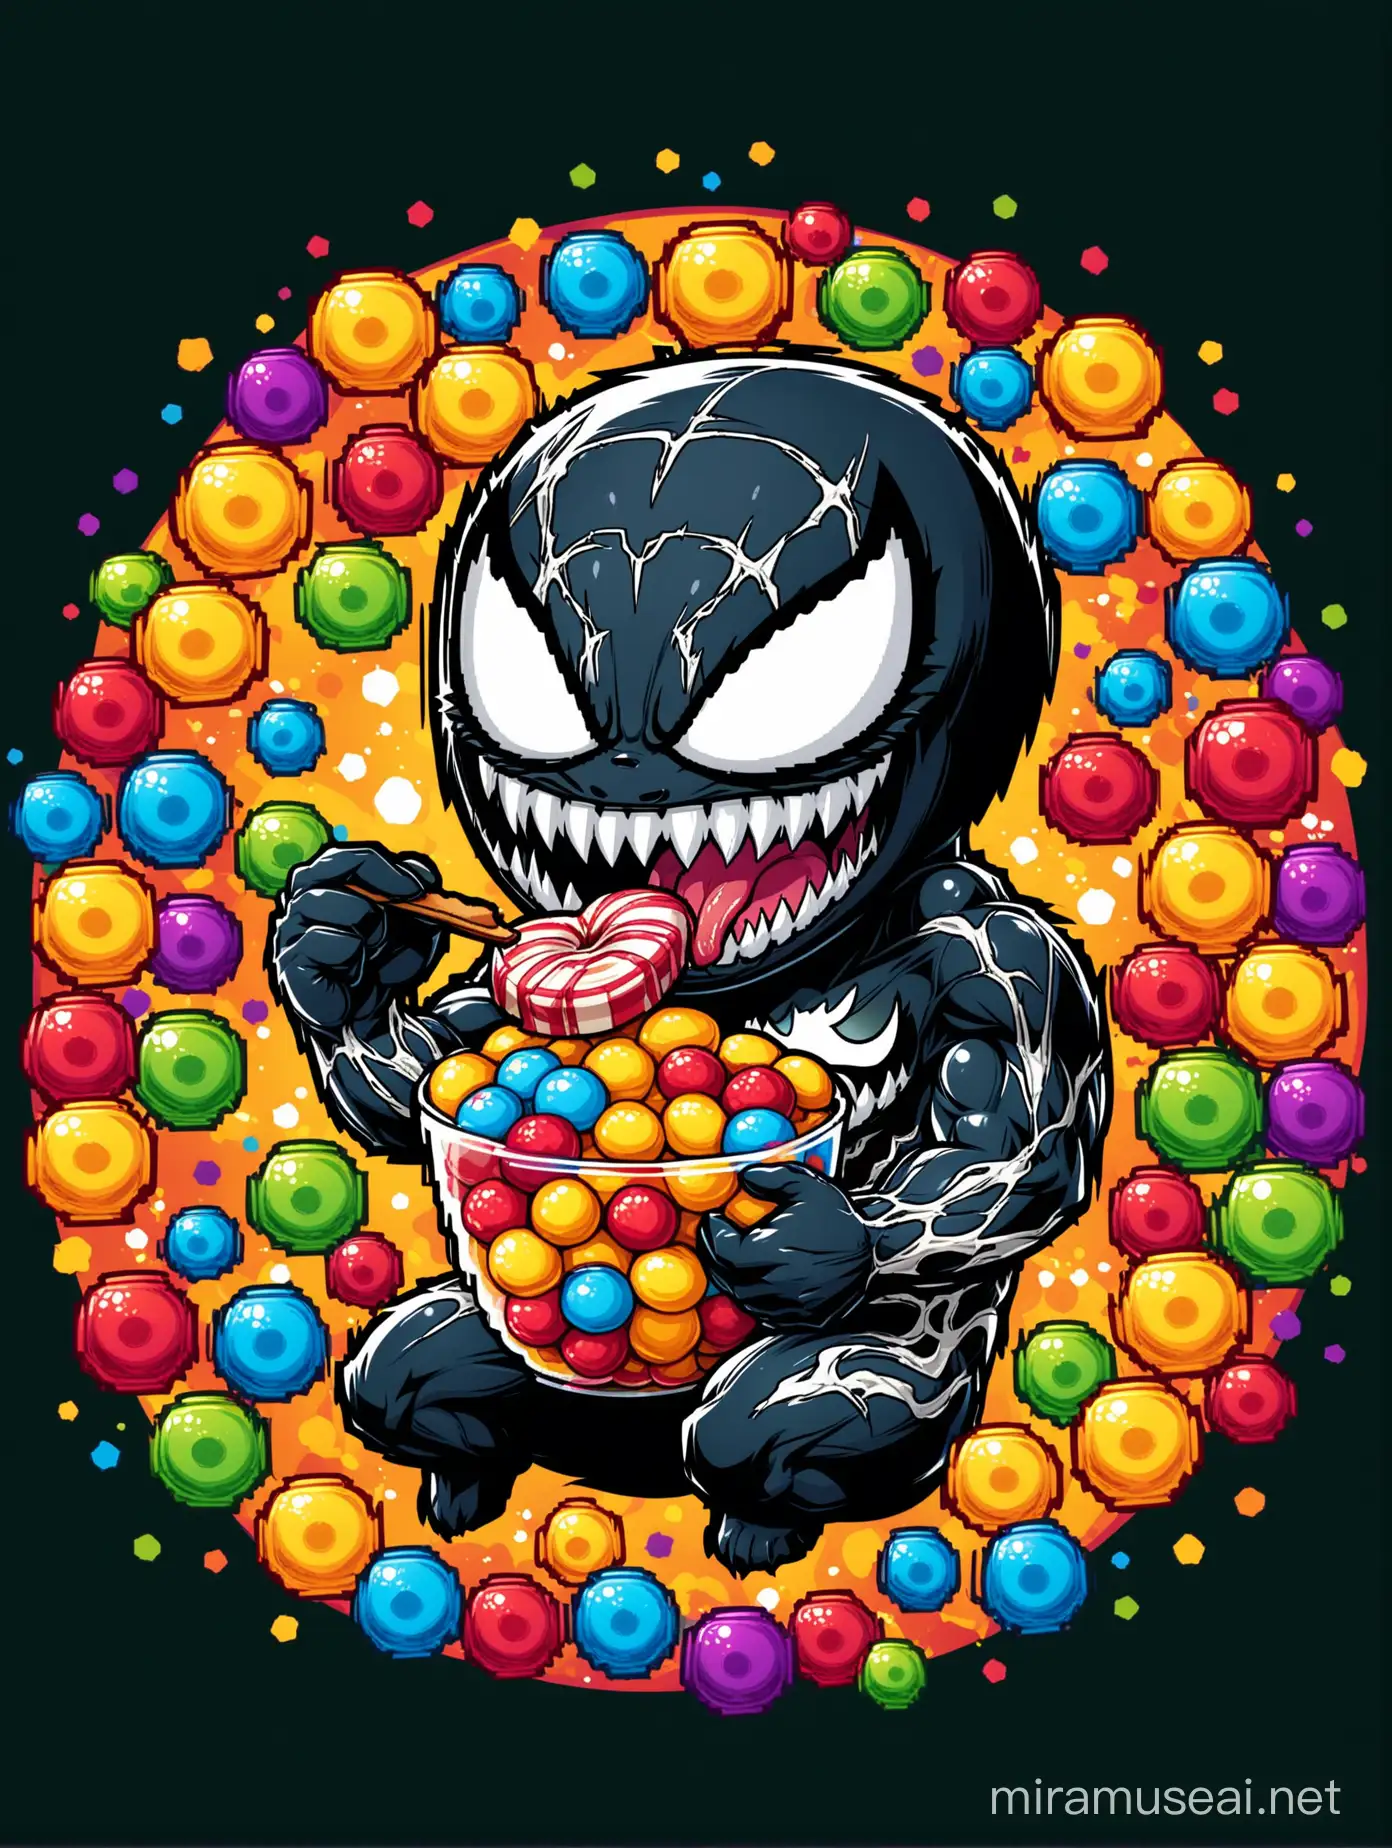 create a vibrant full color artistic shirt design of venom from marvel, in a chibi style, with a big head and small body, eating lots of sweet snacks, uncut from the frame, on black background, and colorful graphic visual elements